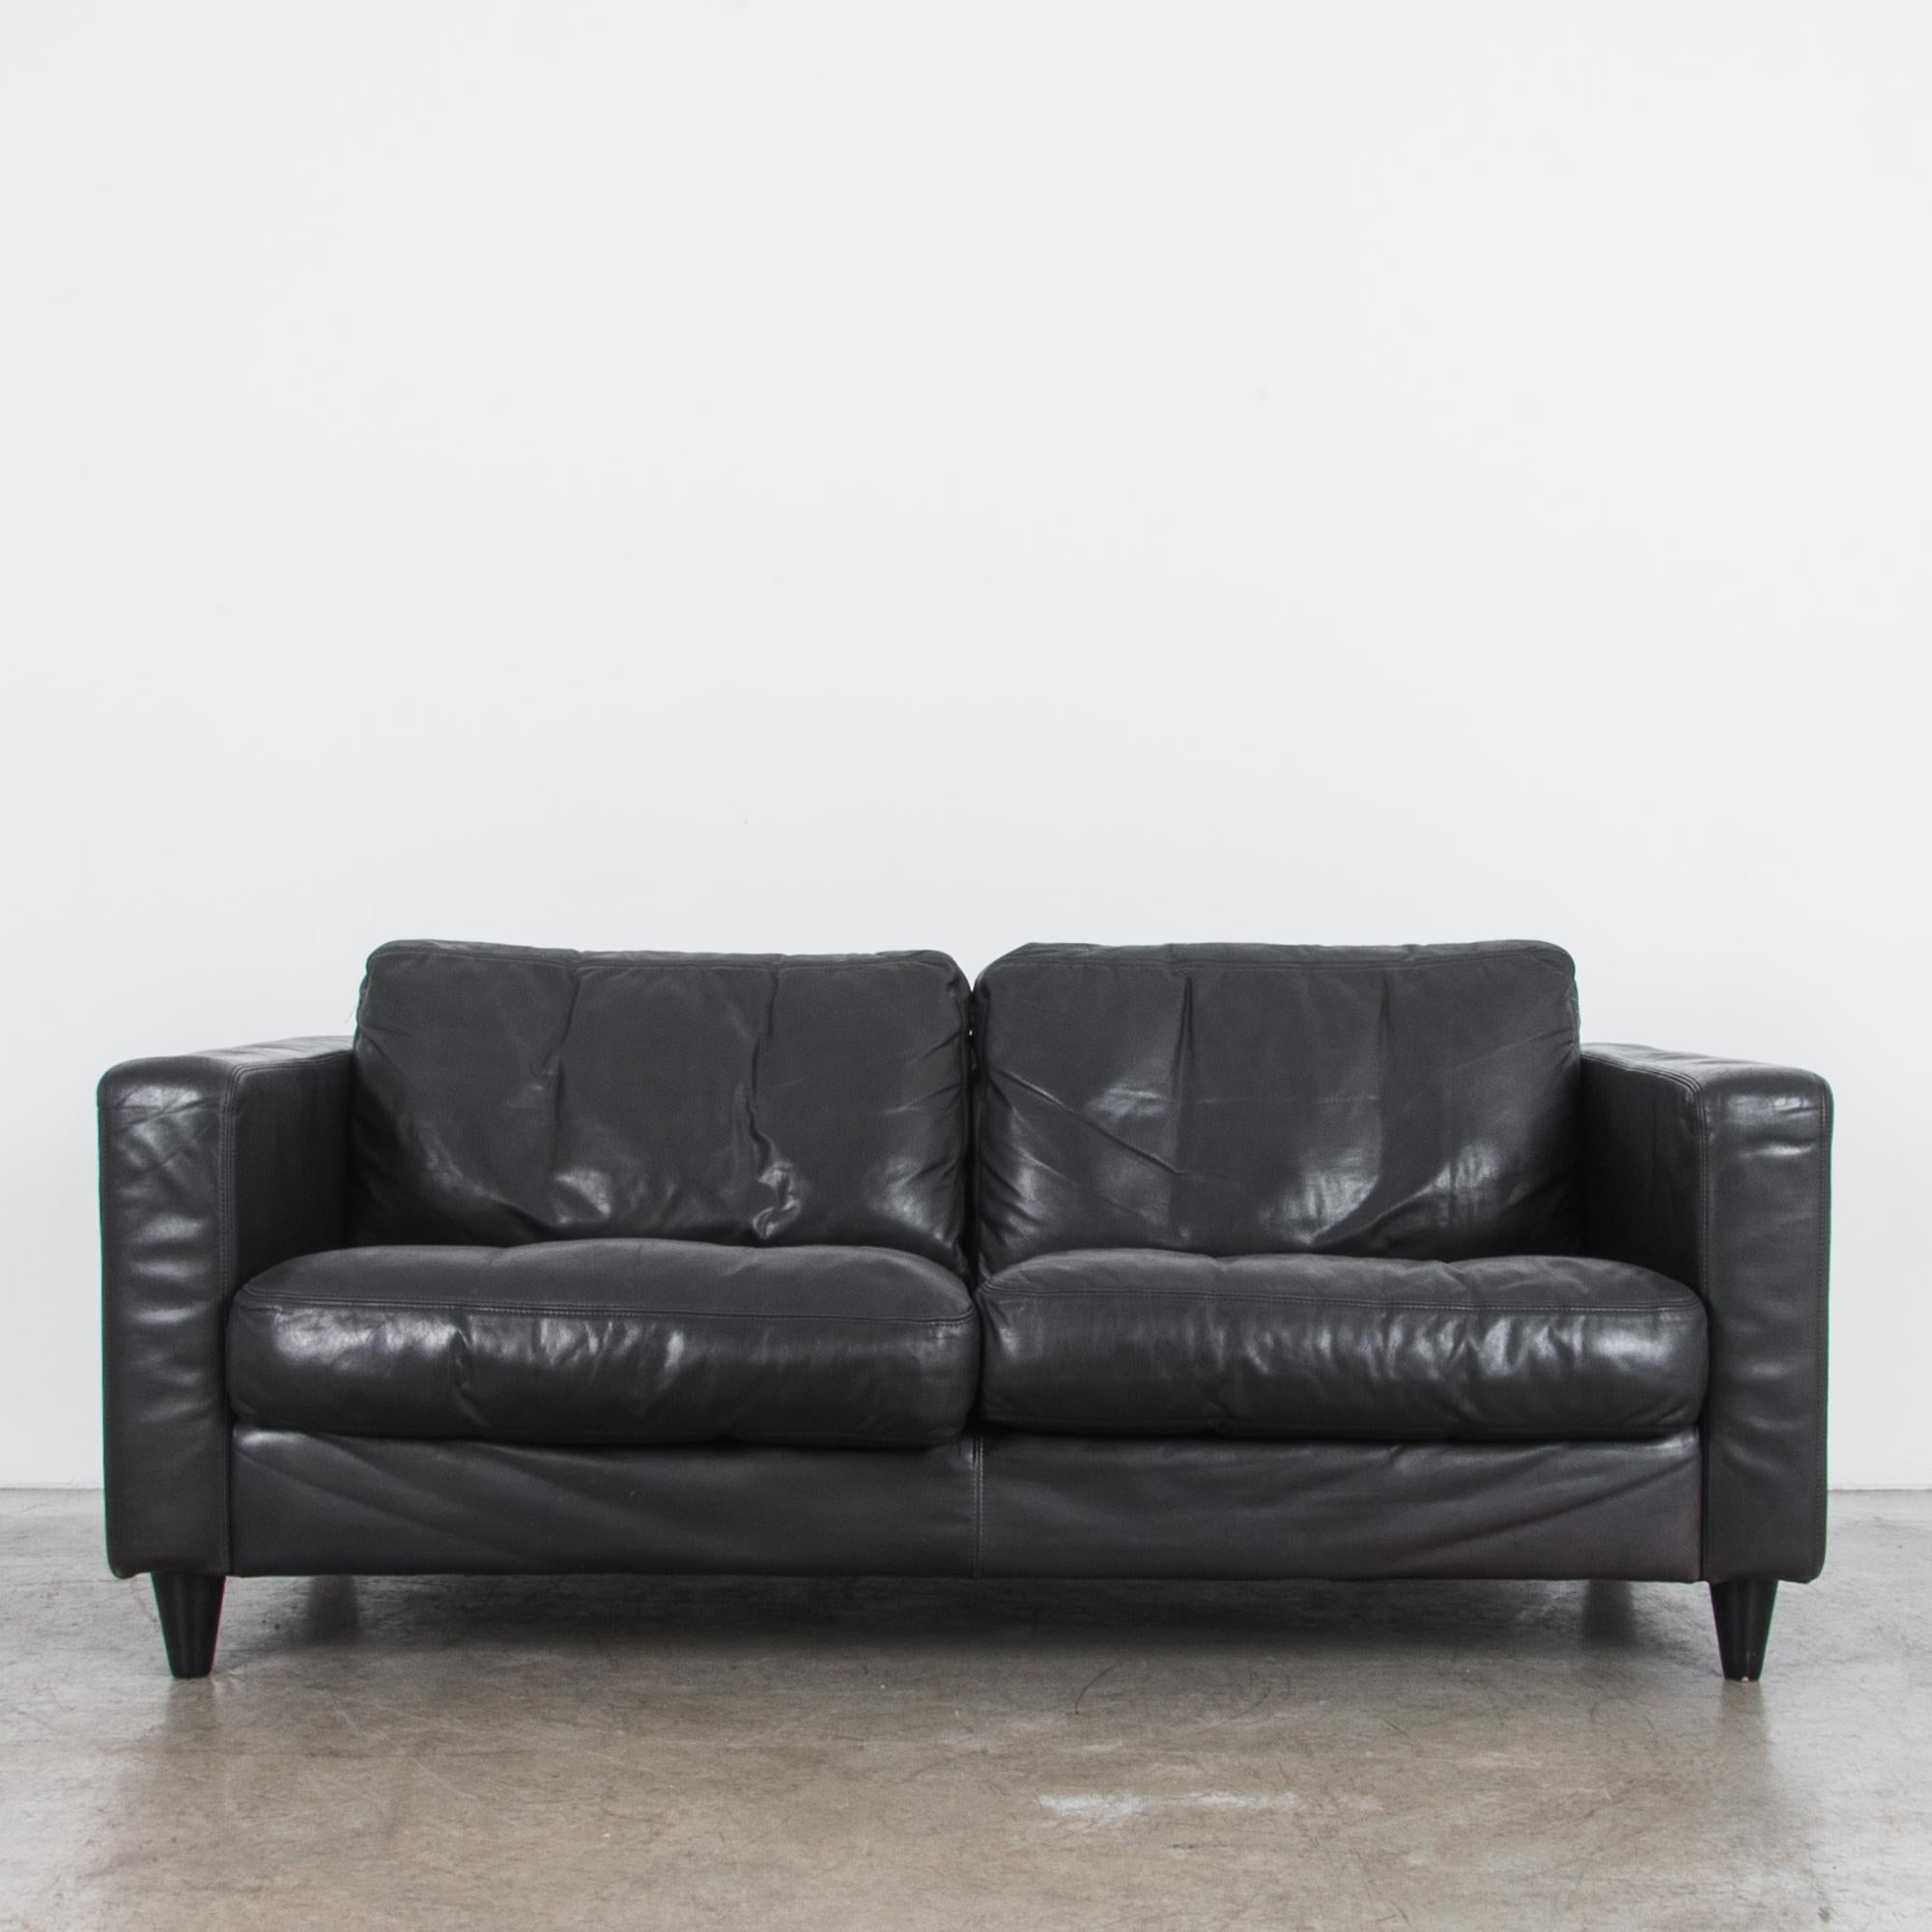 A black leather sofa by German furniture design studio Machalke, circa 1970. The wide cubic frame of the “Pablo” design speaks to a modern sensibility, while raised sofa legs give this piece a comfortable shape. The detailed leather workmanship is a